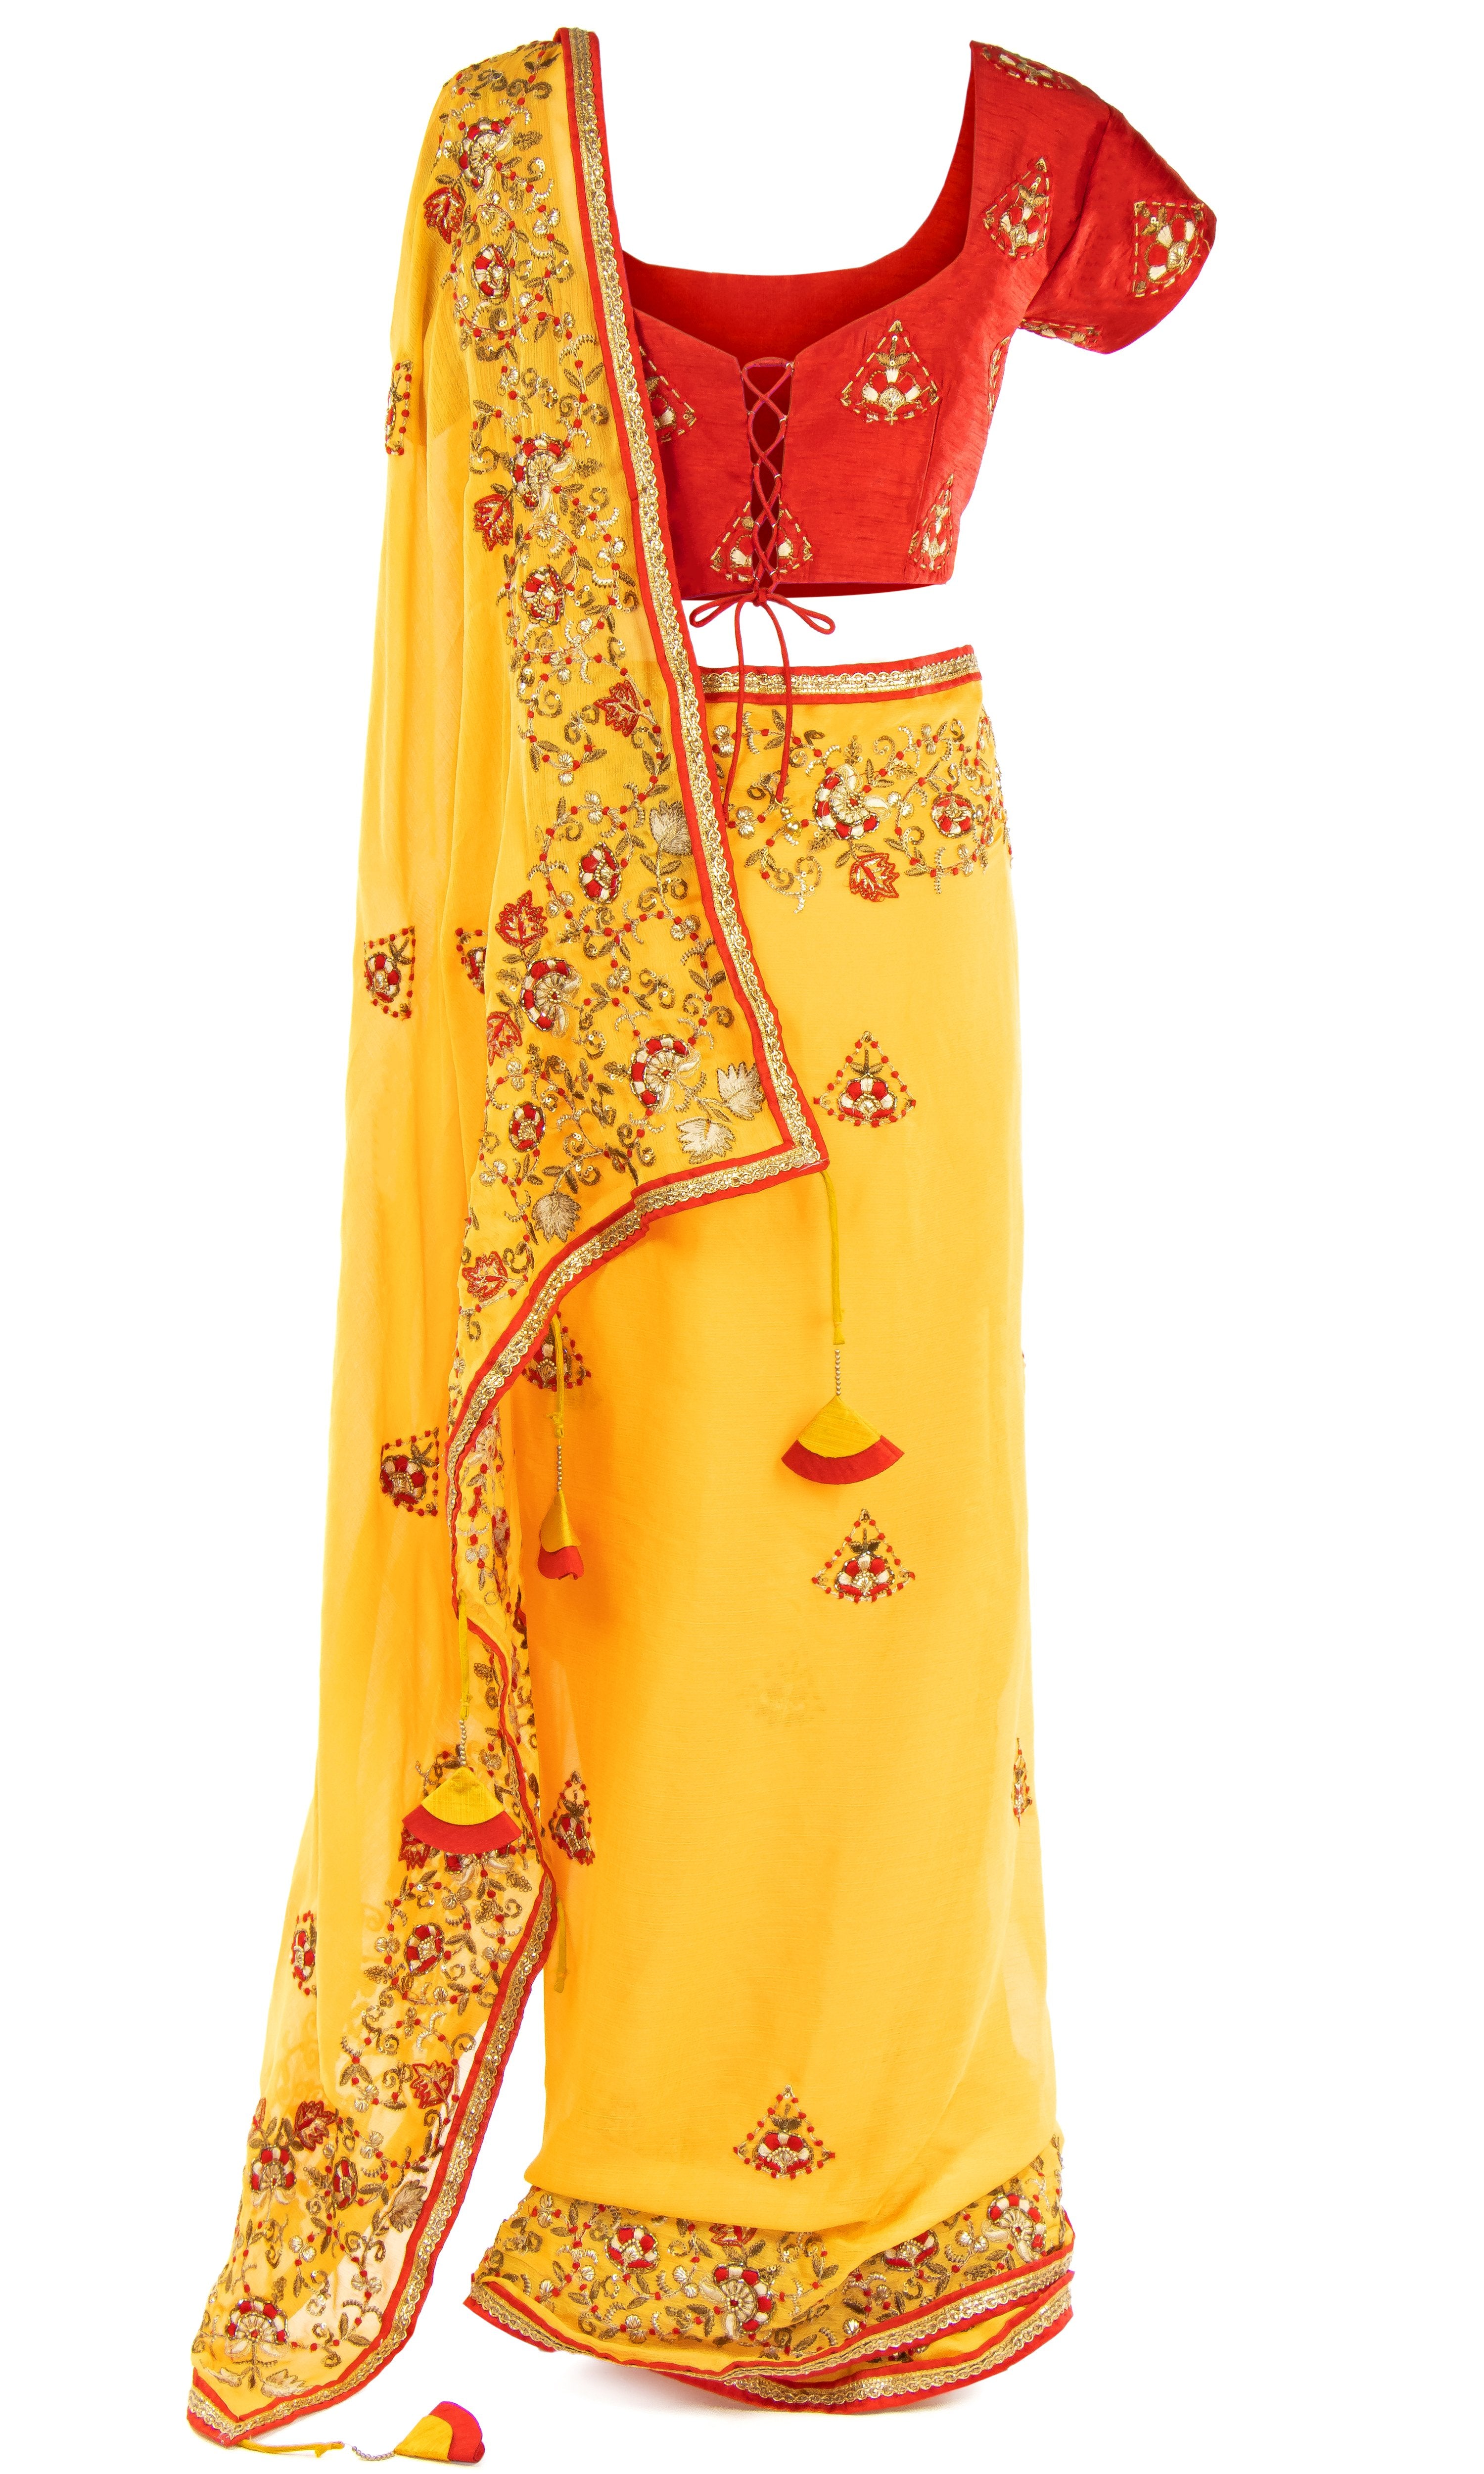 Yellow Chiffon Saree with Matching petticoat is included. The classic red blouse has the sweetest touch of Zari work on the sleeves.